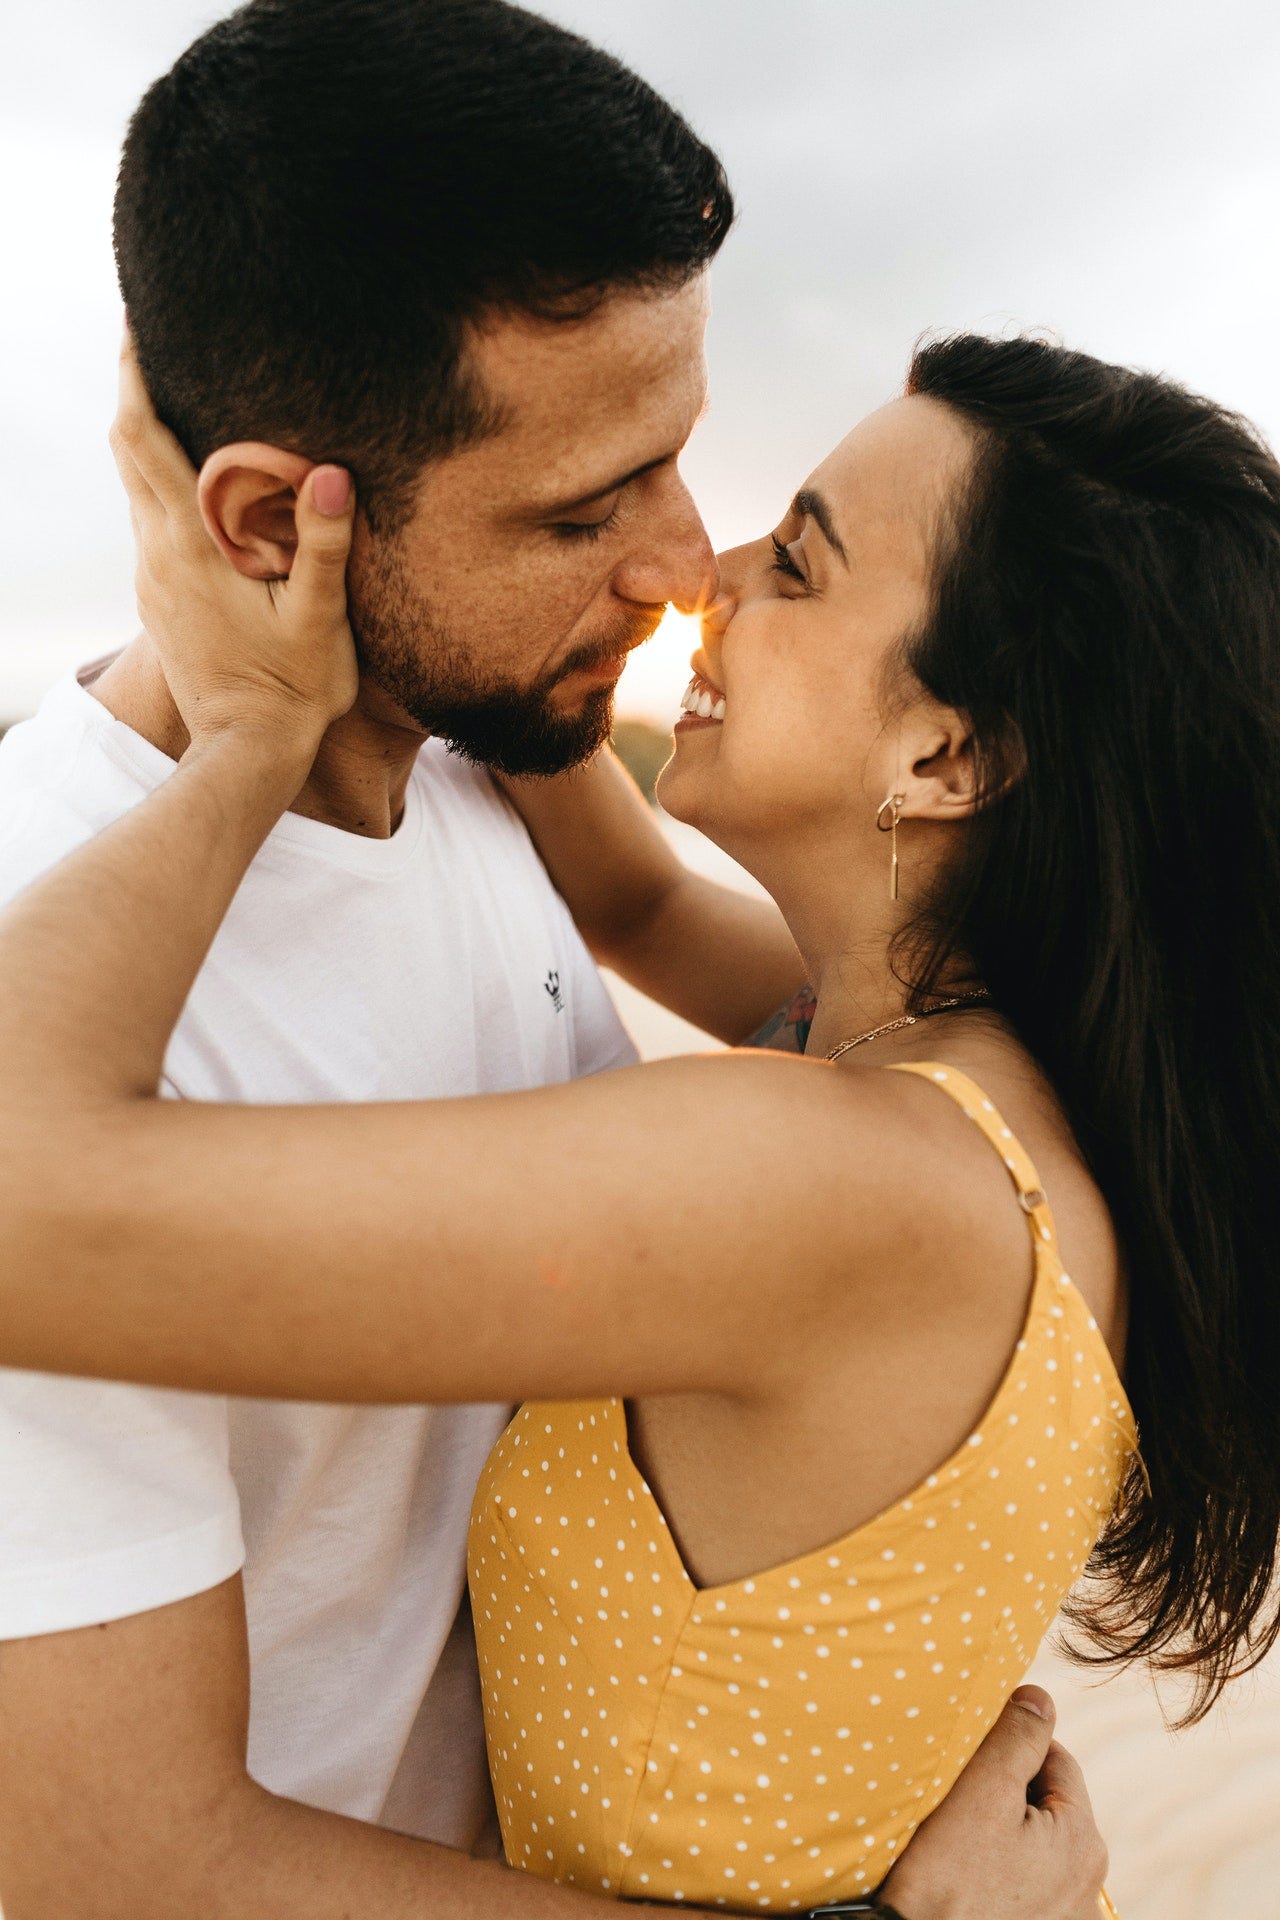 100+ True Love Quotes That Embraces the Purest Essence of Connection